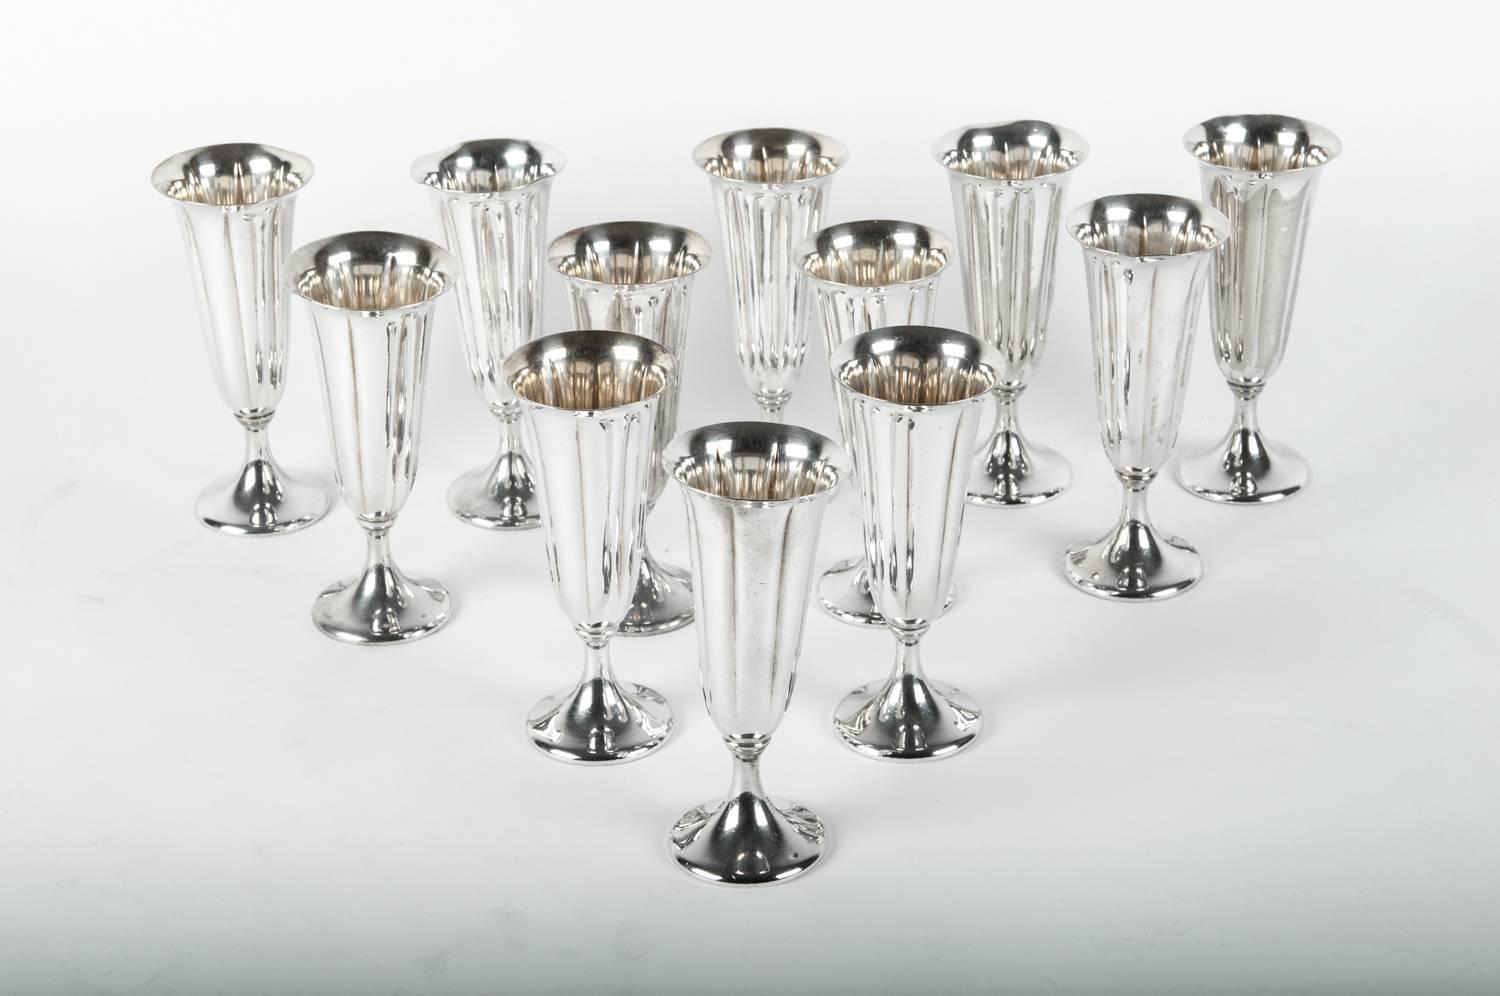 Vintage American silver plated set of 12 Champagne flute. Excellent condition. Each flute measure 5.5 inches high x 2.5 inches top diameter.